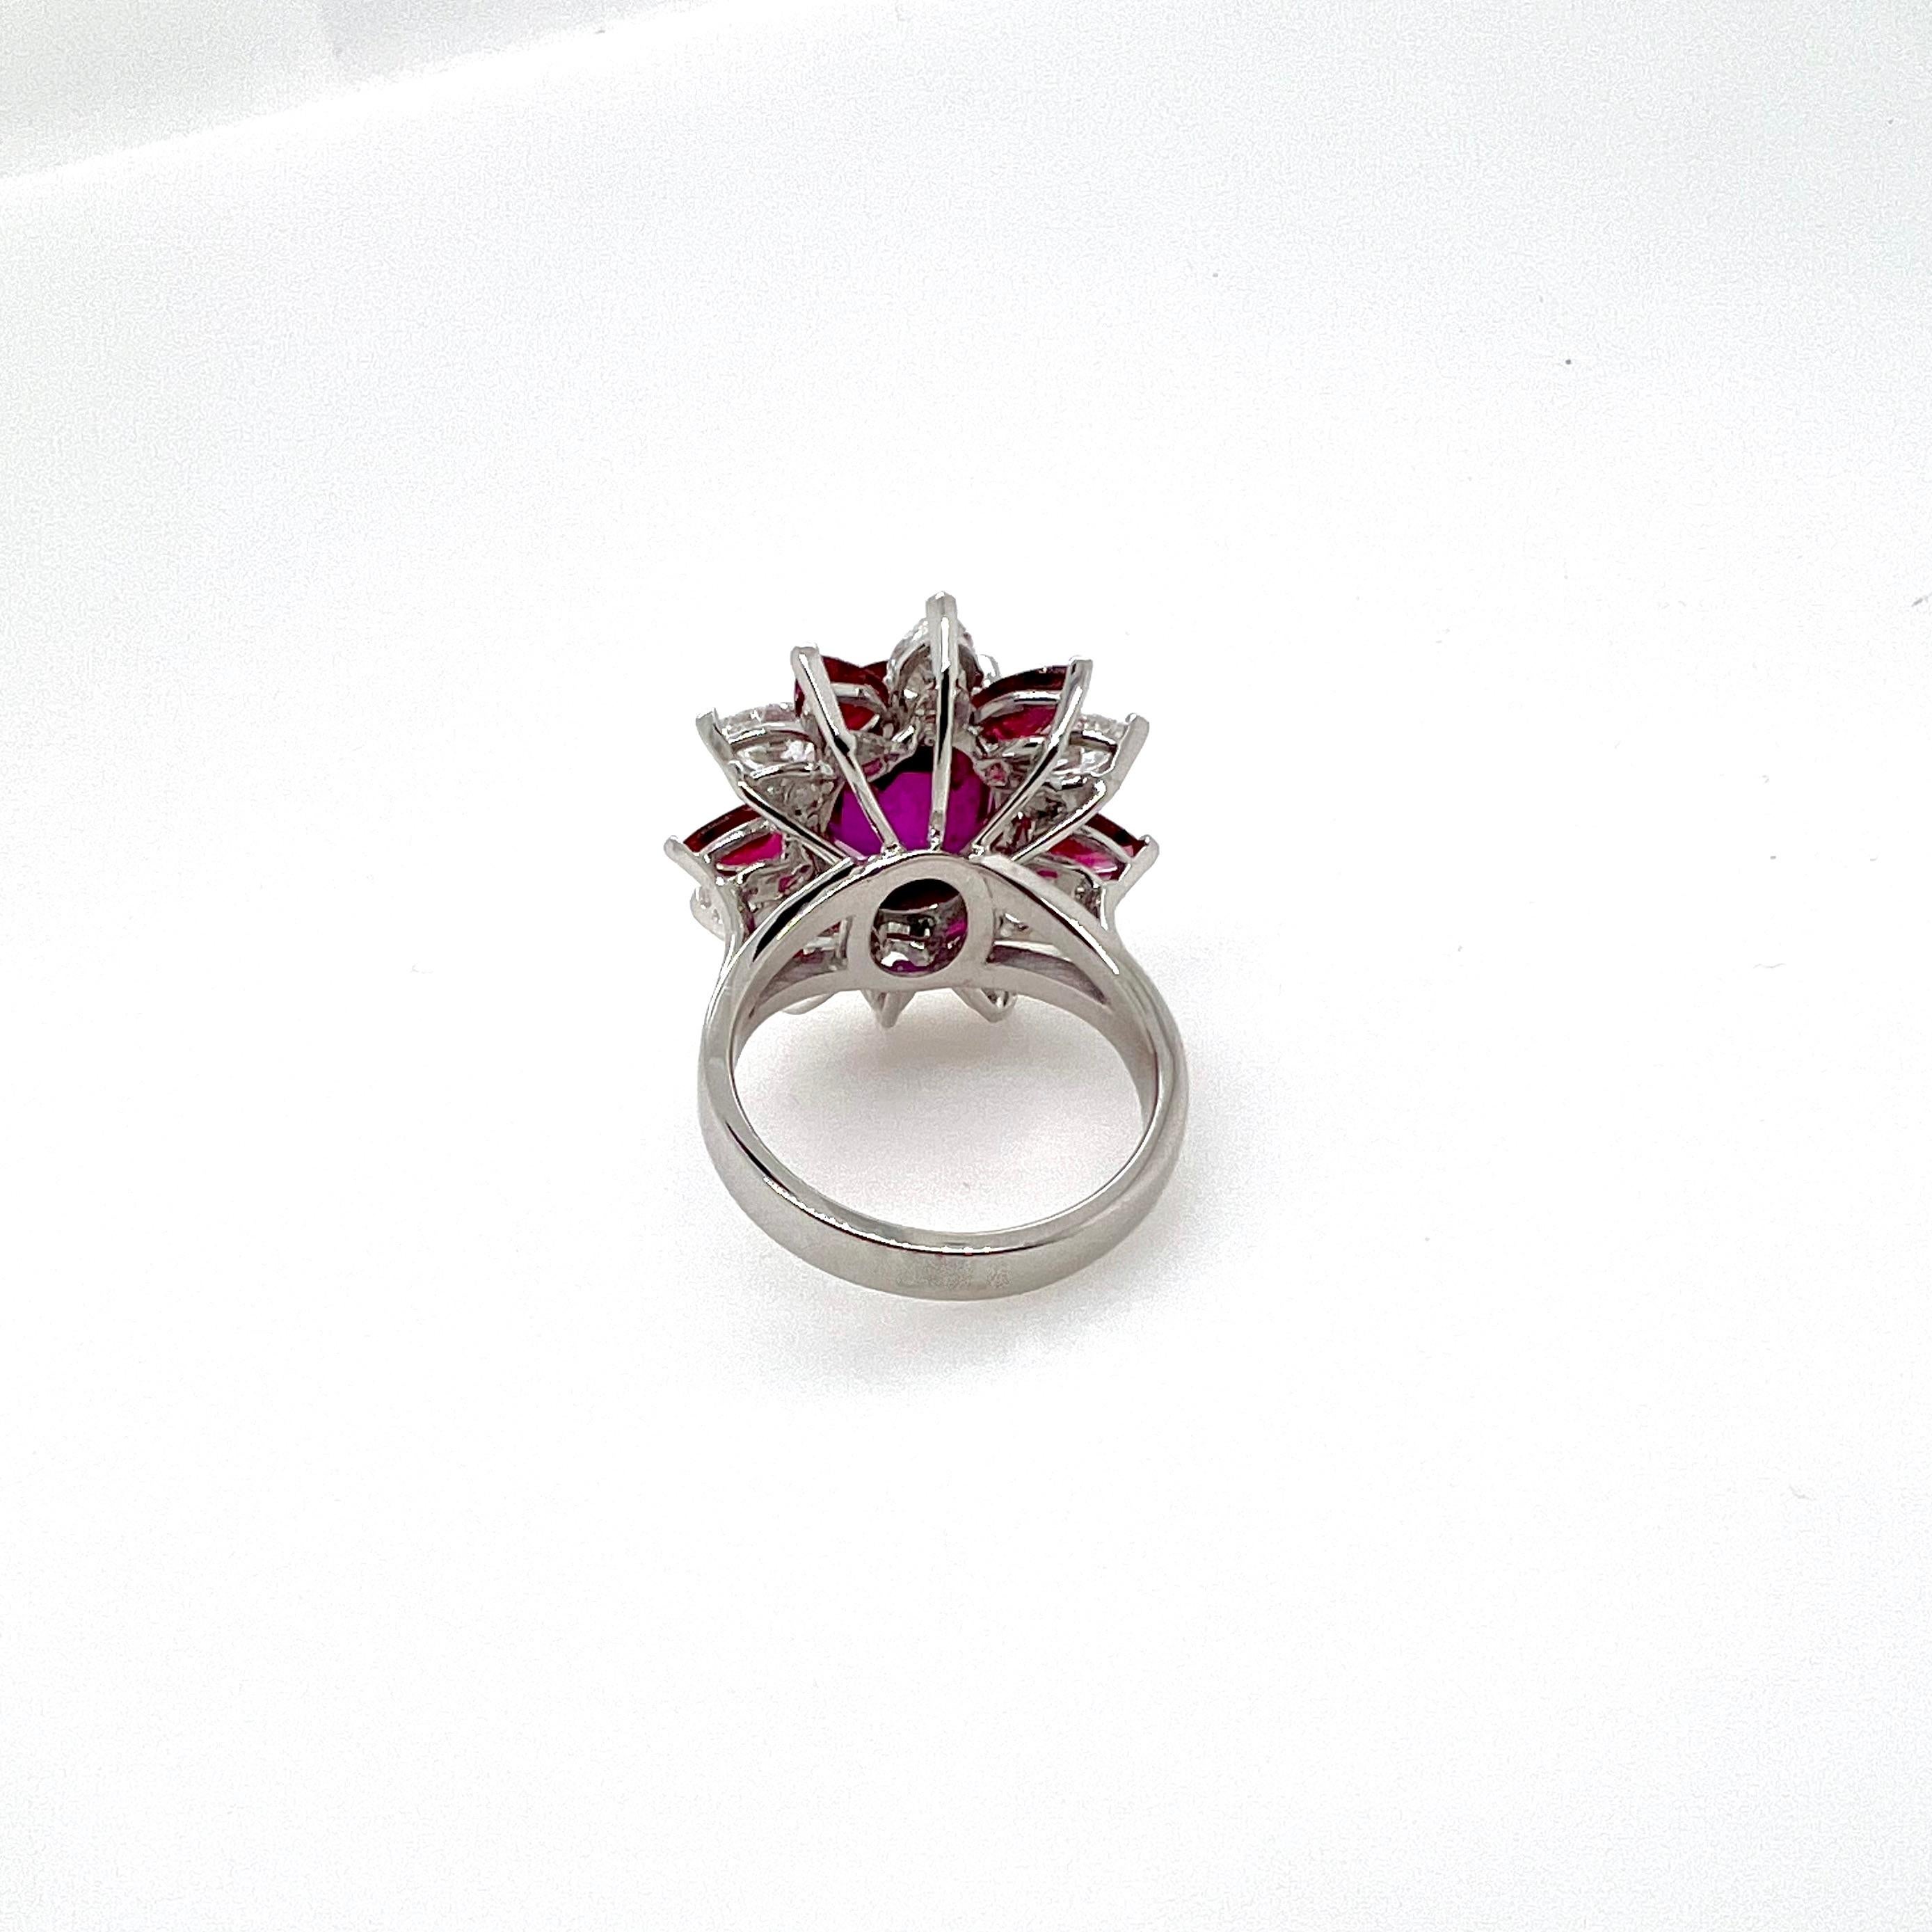 Oval Cut 18k White Gold Burma Ruby GIA Certified Heated with Rubies and Diamonds Ring For Sale